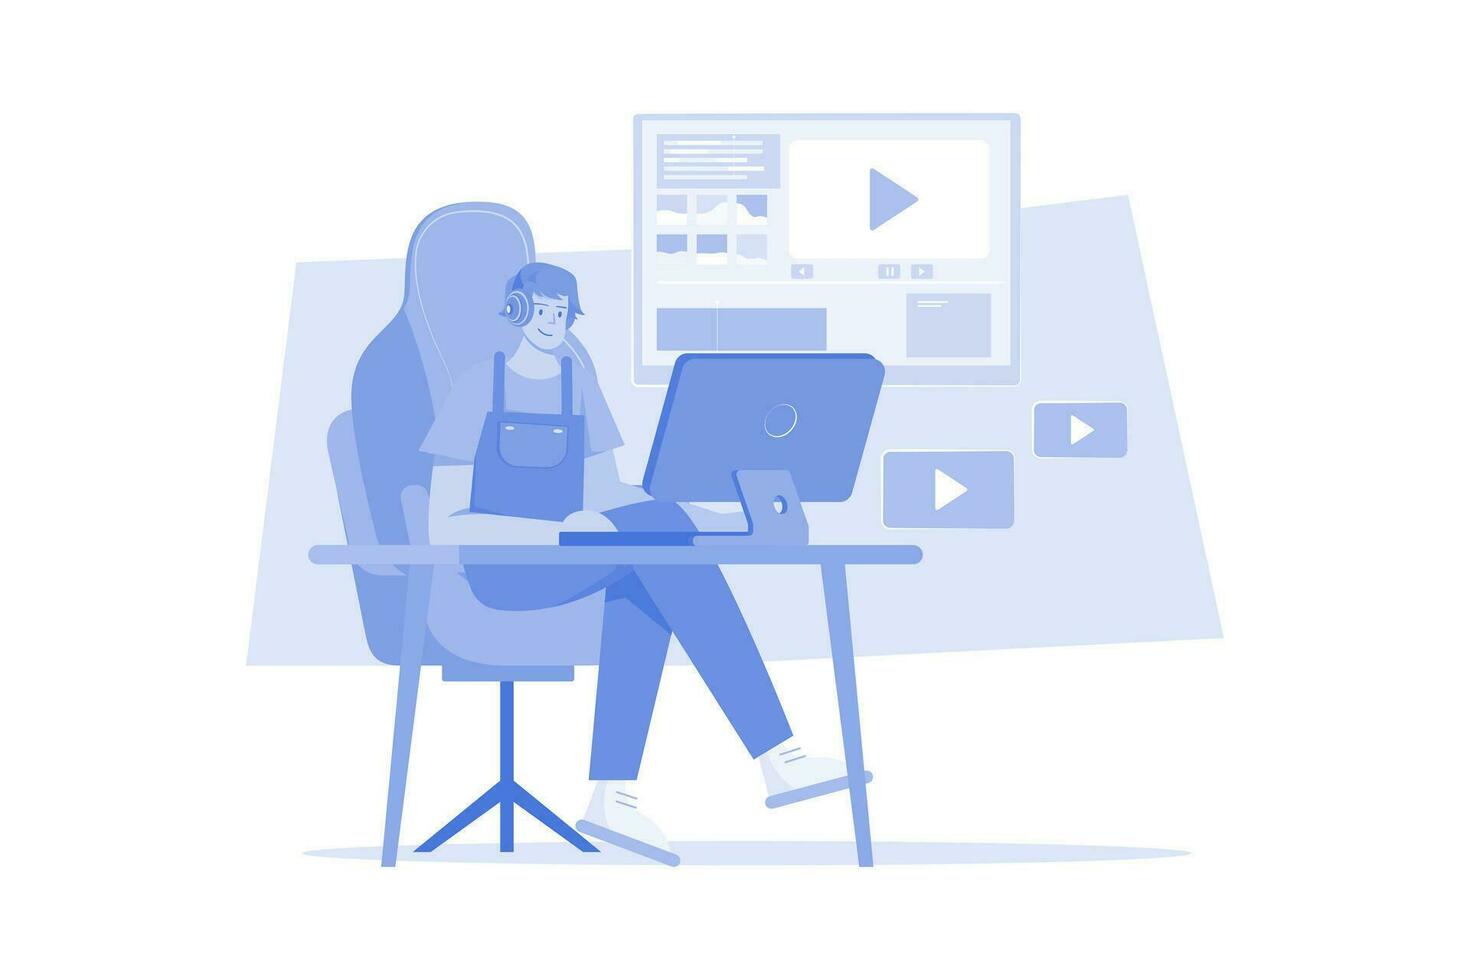 Man Editing Video Illustration concept on a white background vector